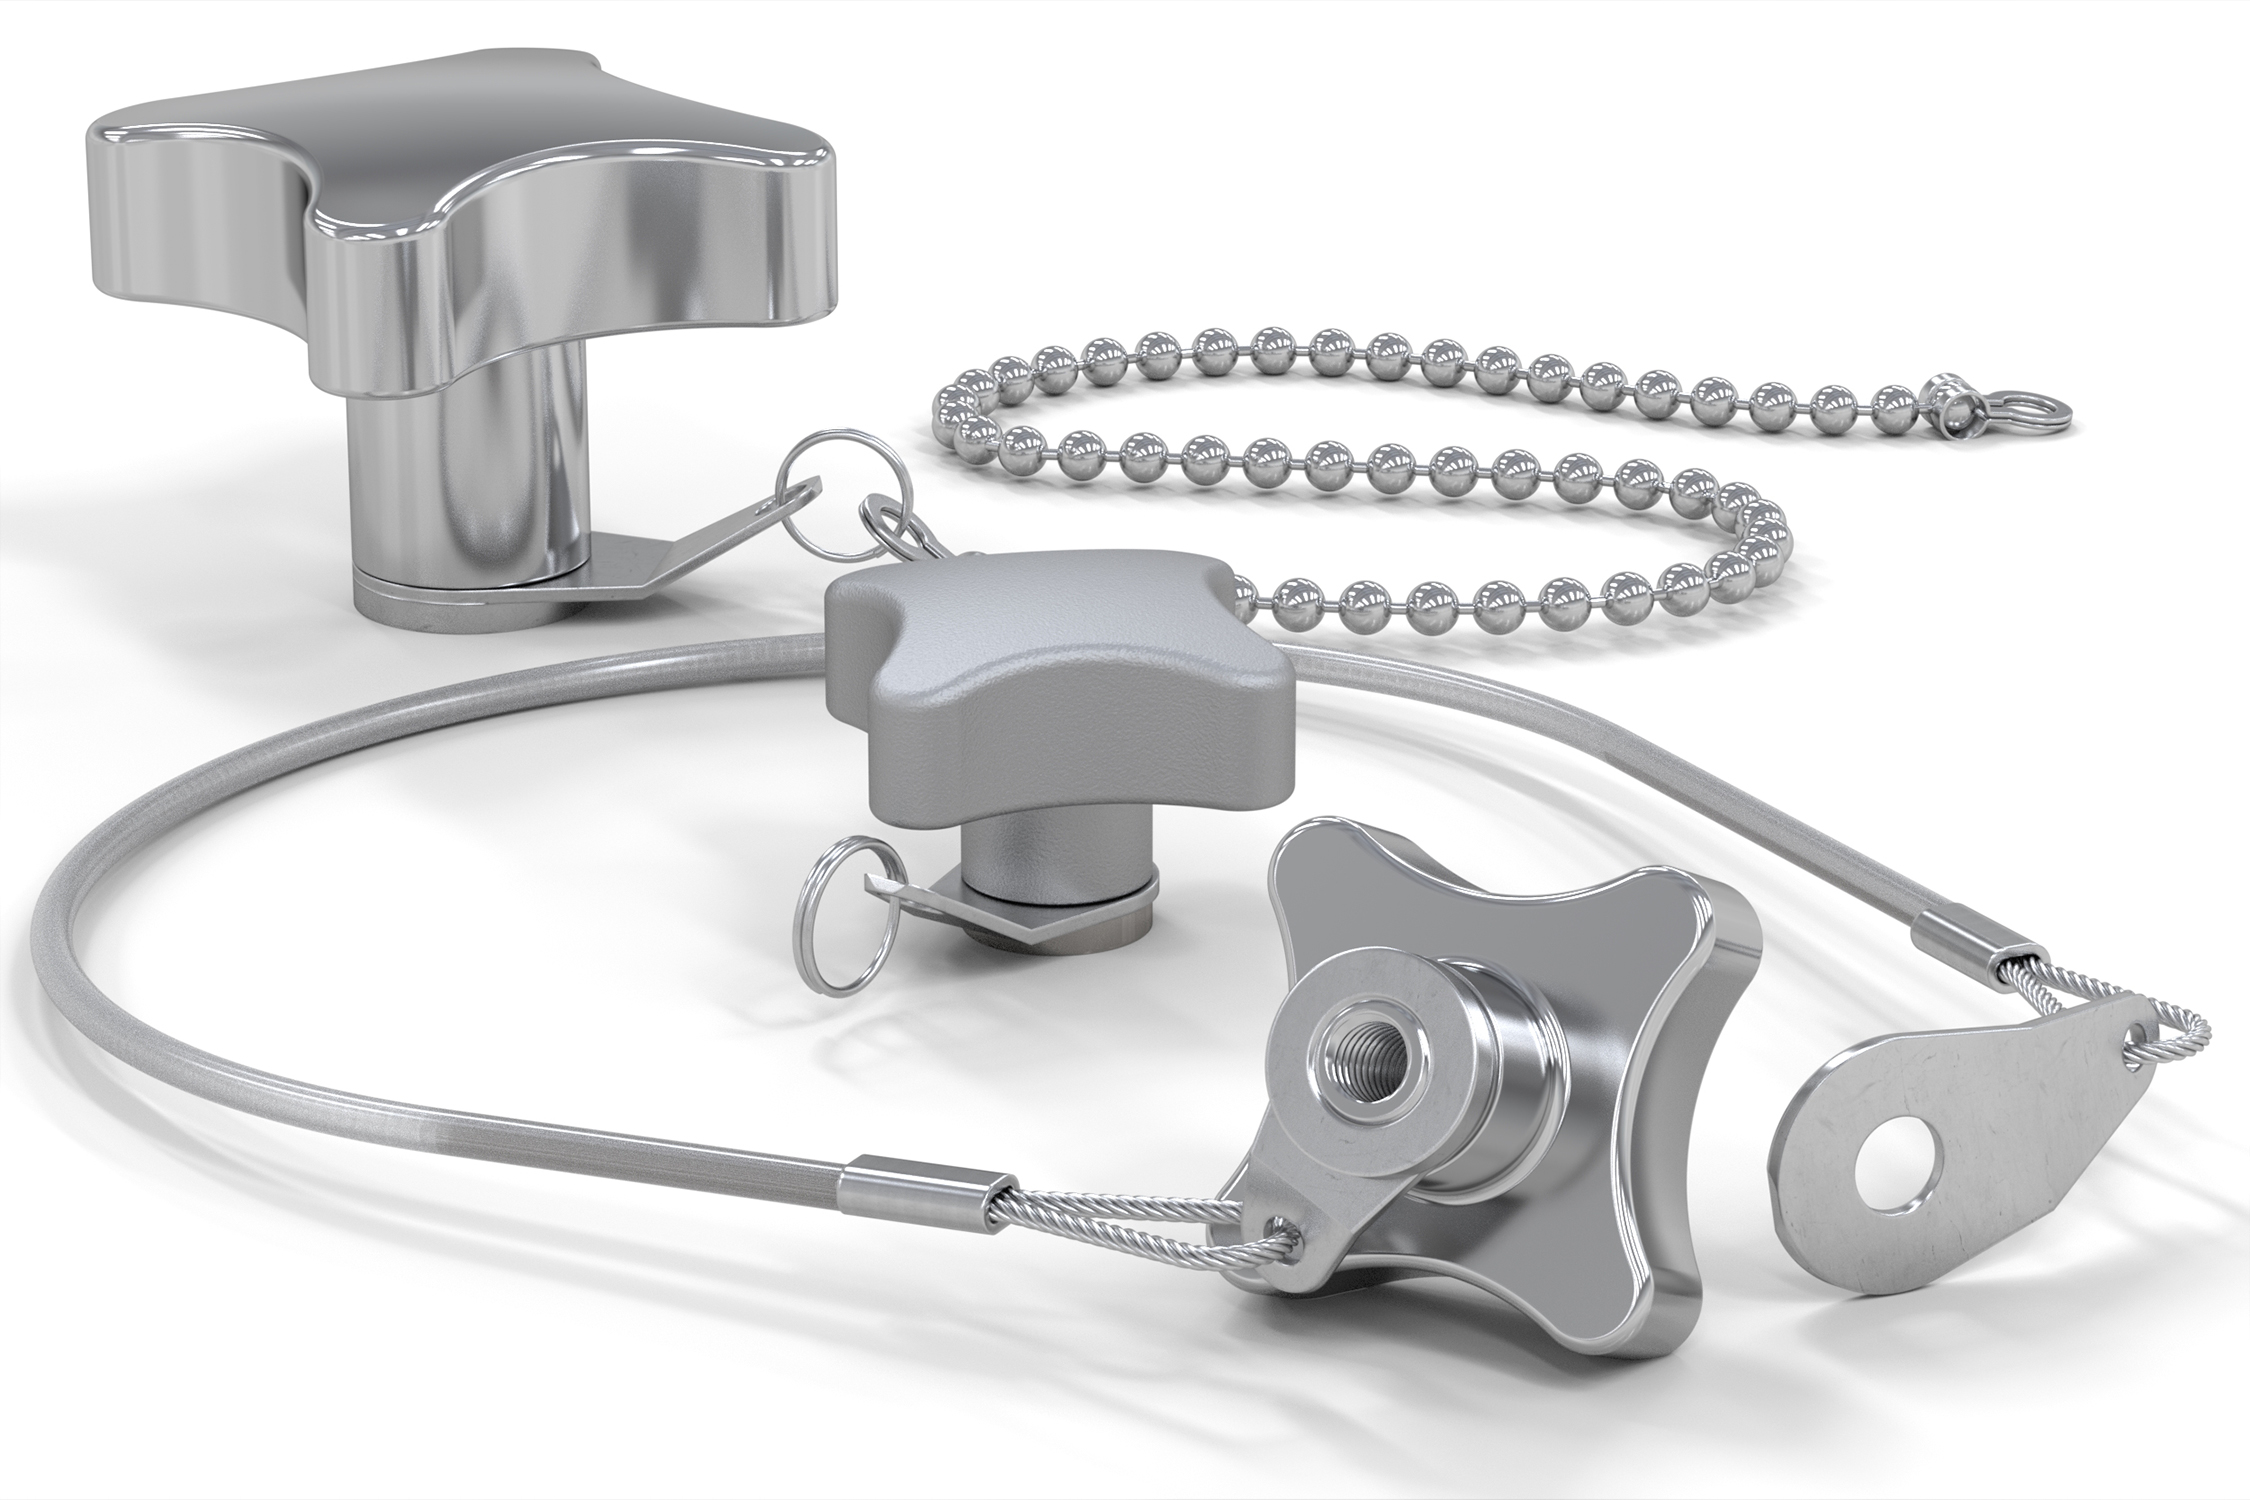 WDS Components retained hand knobs come in three lanyard styles and are made from stainless steel, enabling use across a variety of heavy duty applications.